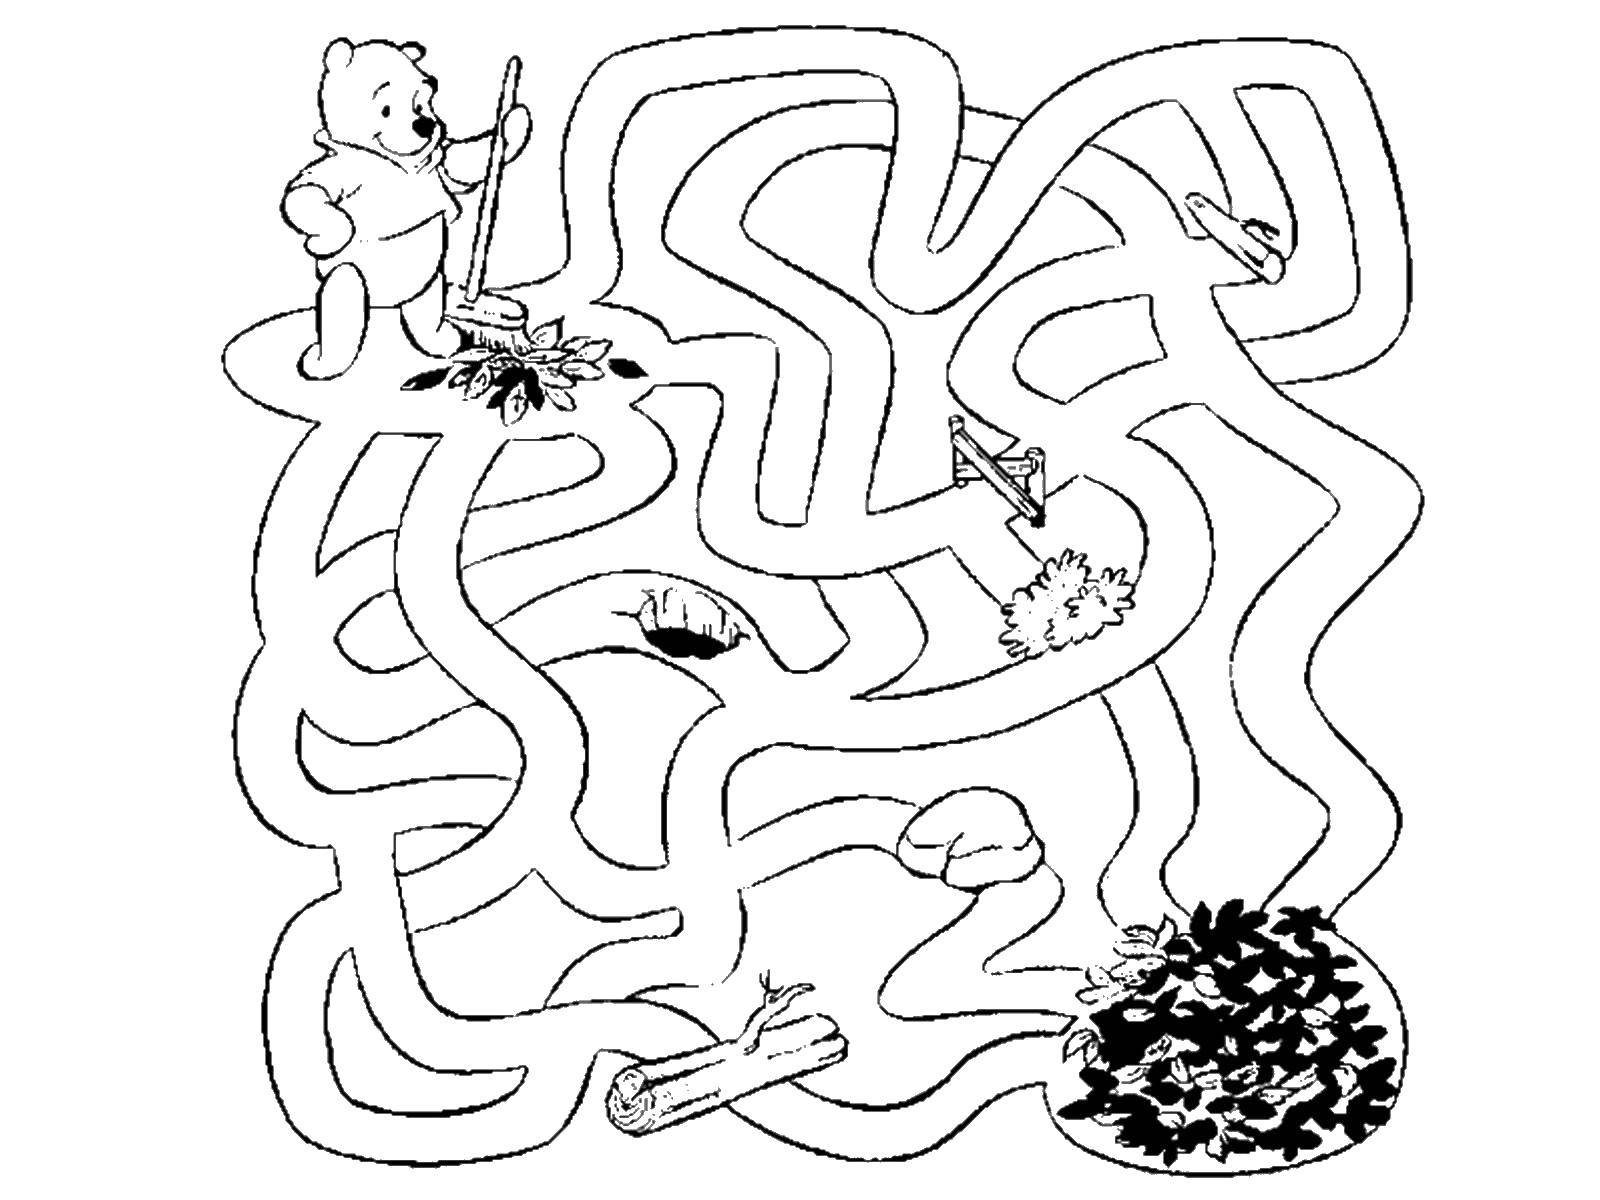 Coloring Winnie the Pooh. Category the labyrinth. Tags:  the labyrinth.